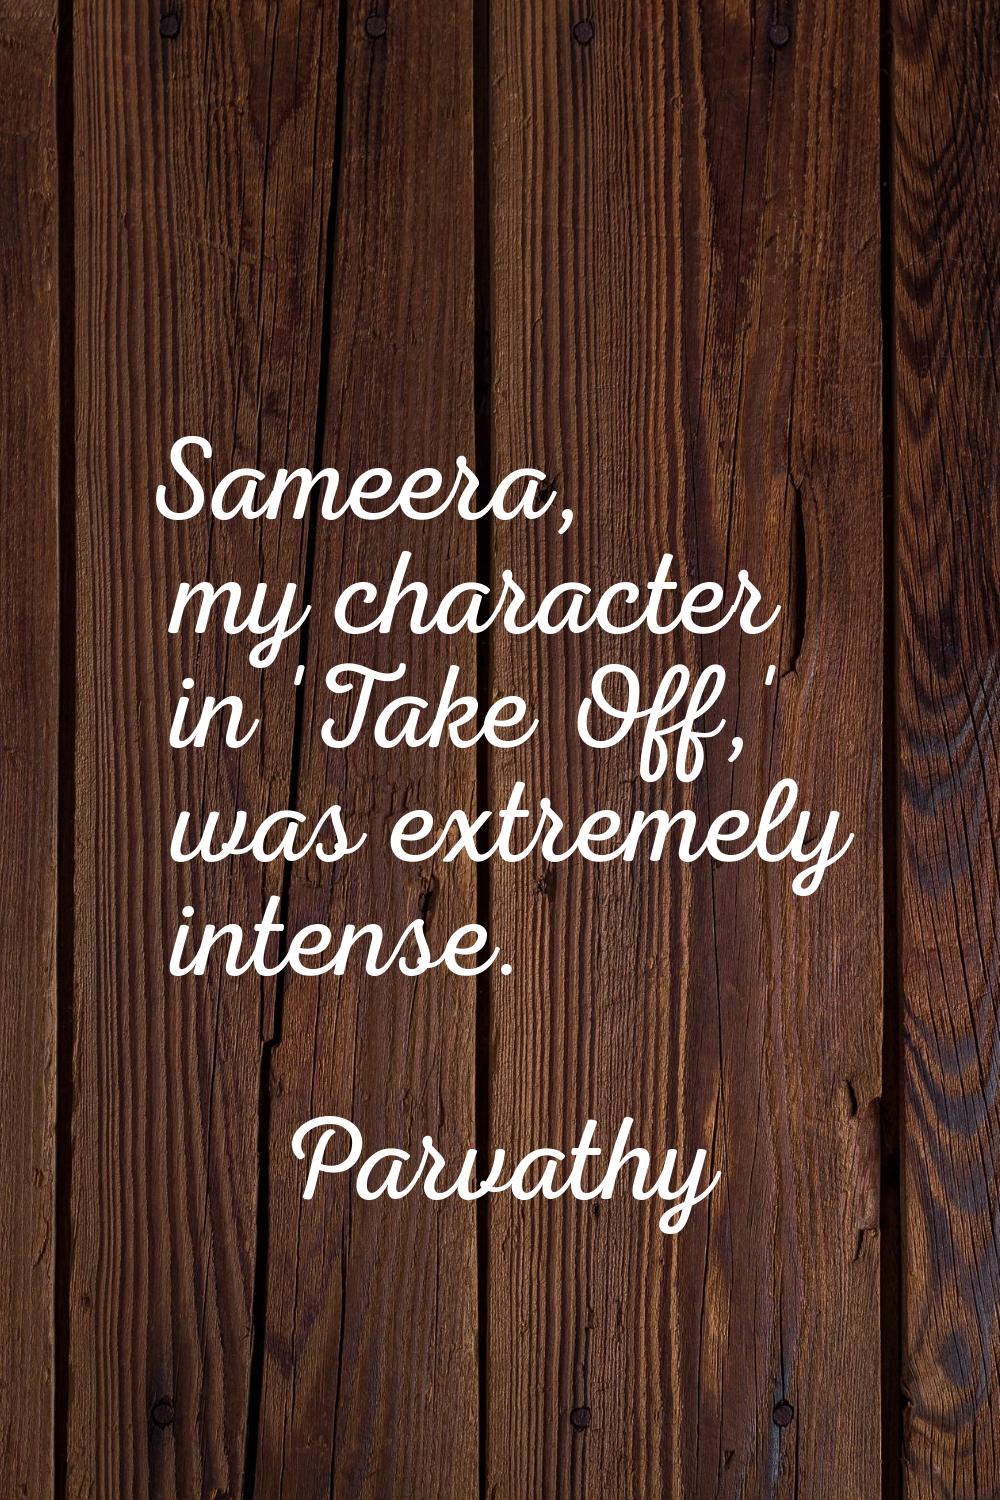 Sameera, my character in 'Take Off,' was extremely intense.